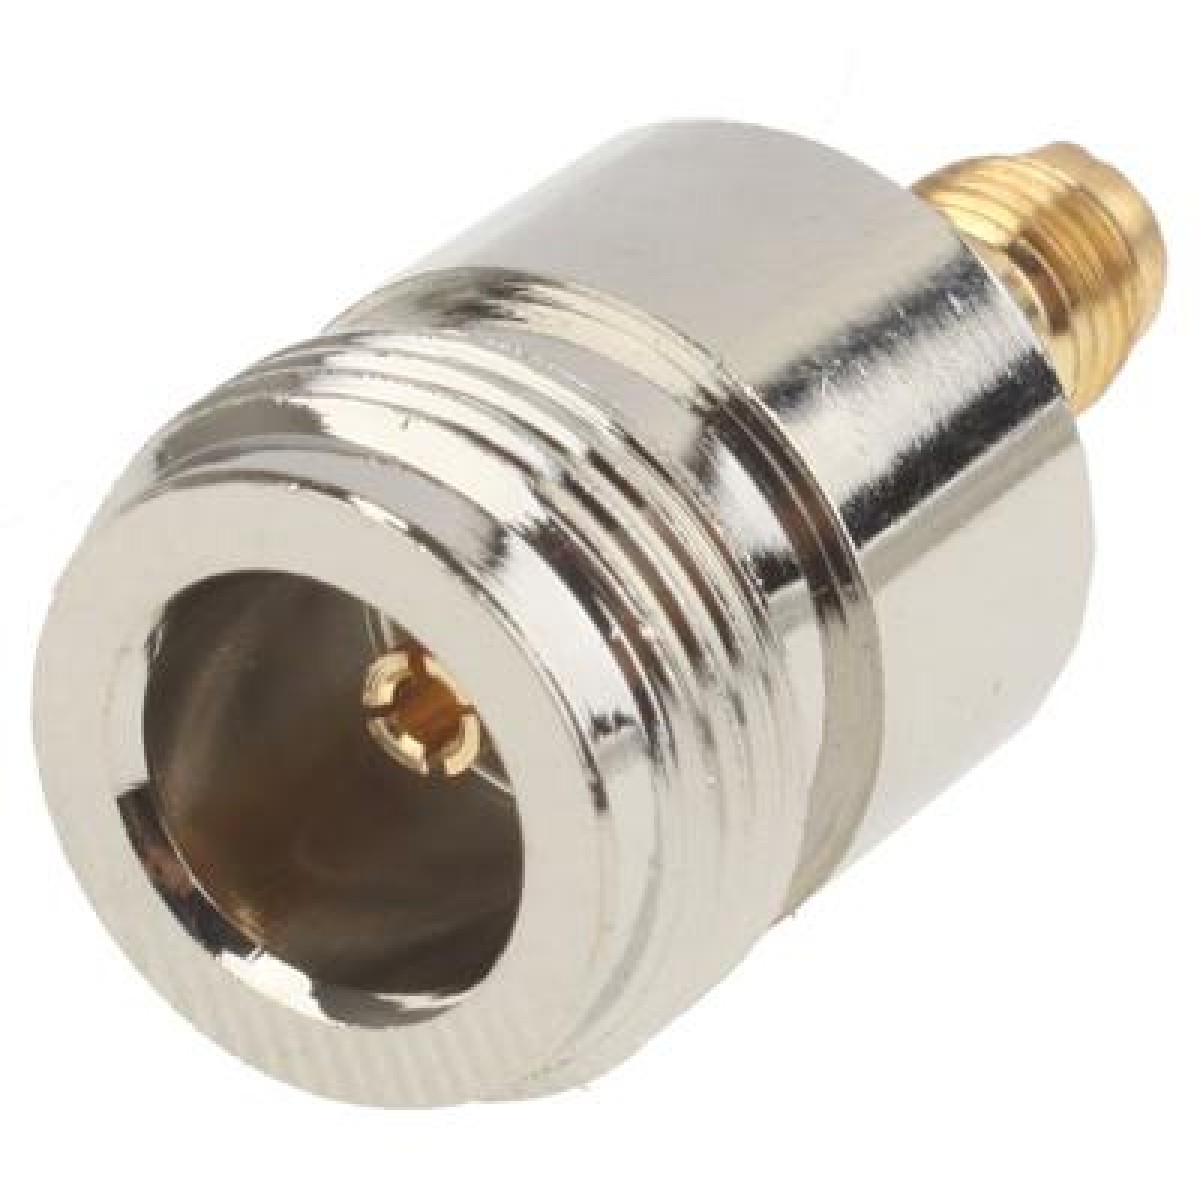 N Female to SMA Female Connector